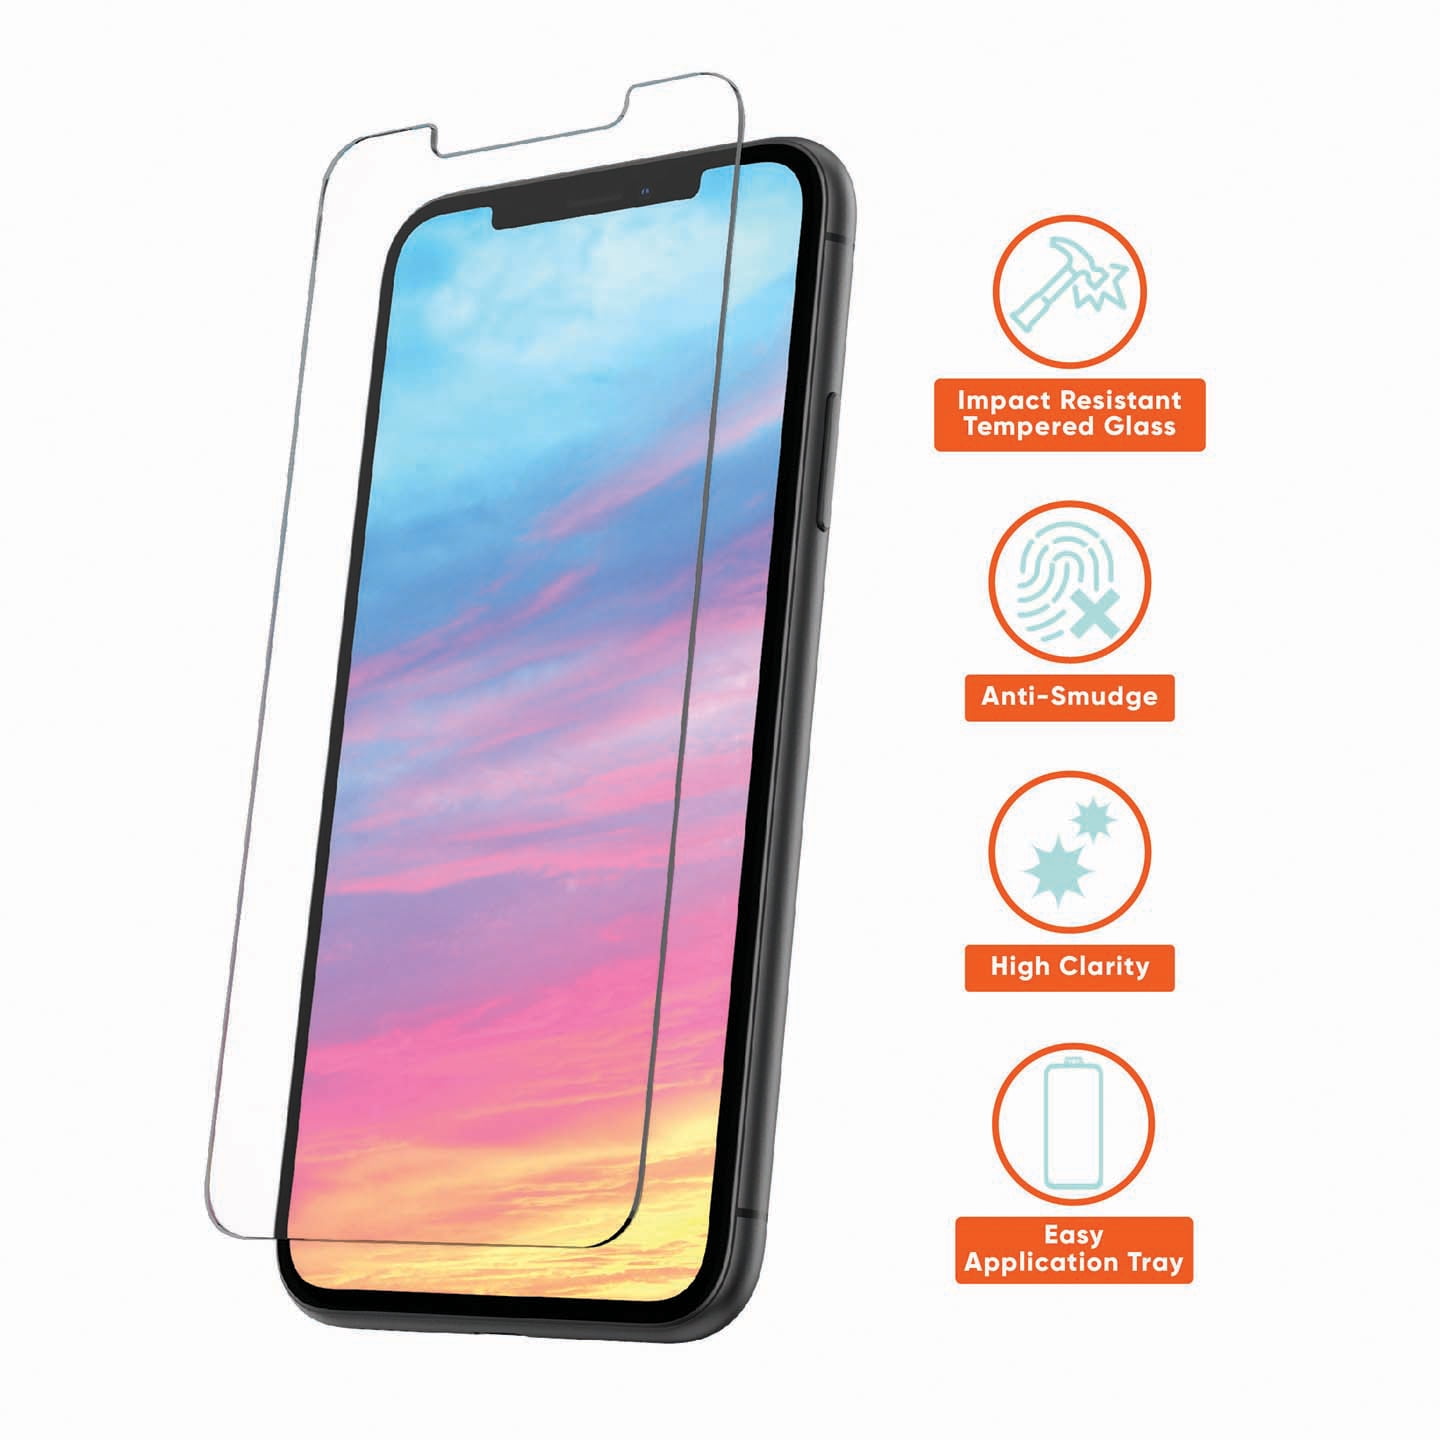 onn. Glass Screen Protector with ImpactGuard Technology for iPhone 11 Pro  Max, iPhone XS Max